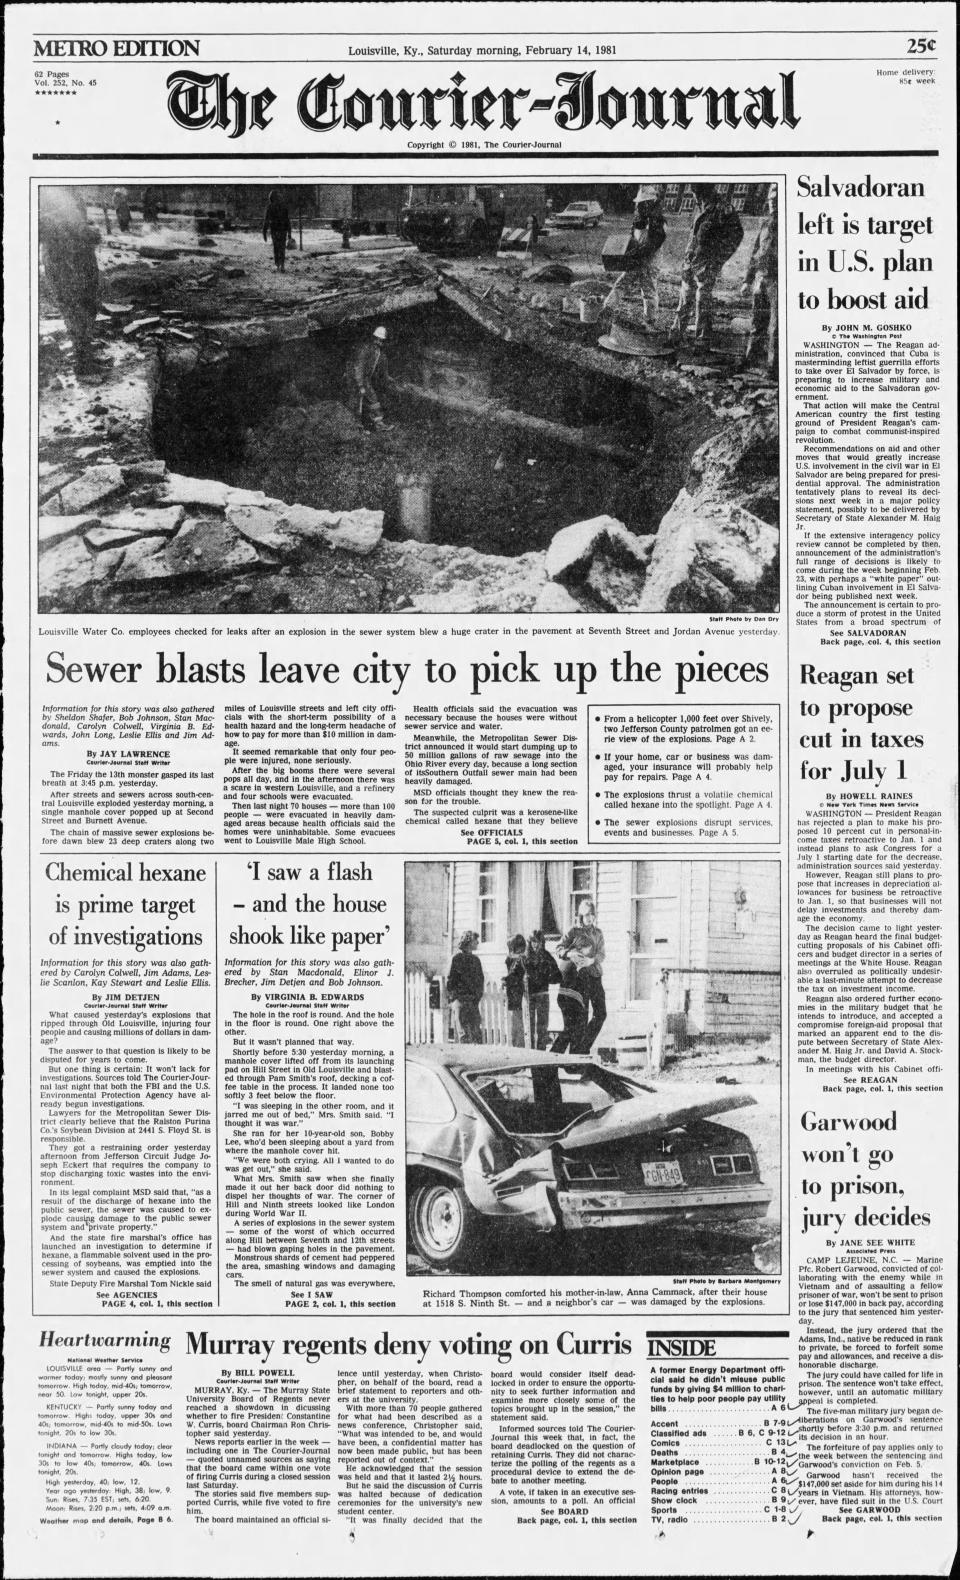 The front page of the Louisville Courier Journal on Saturday, Feb. 14, 1981, covering sewer explosions that hit the city.